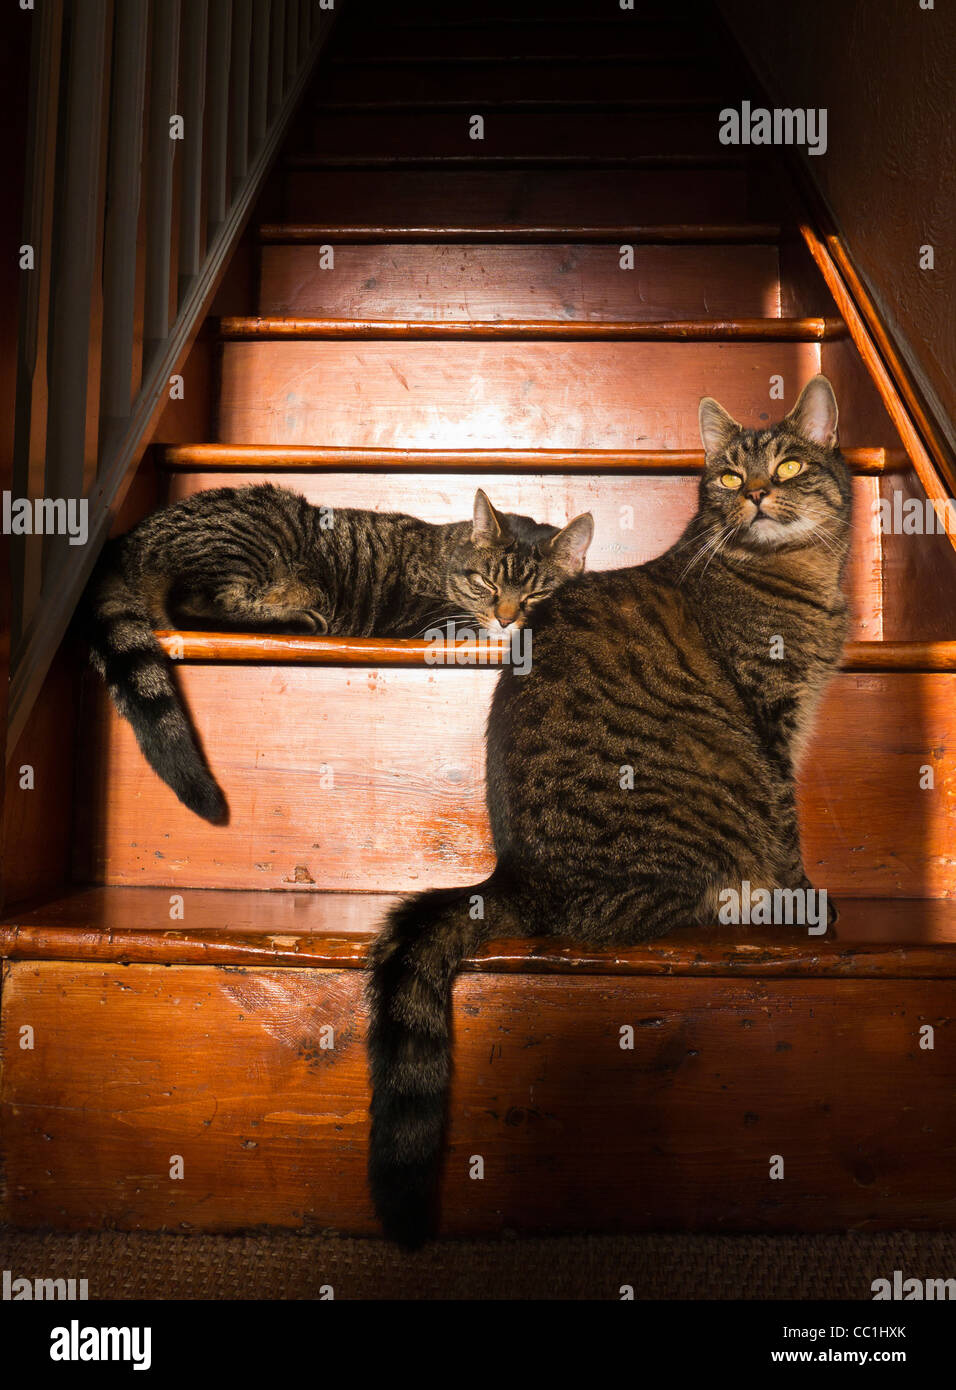 Two tabby cats on a wooden staircase. Stock Photo